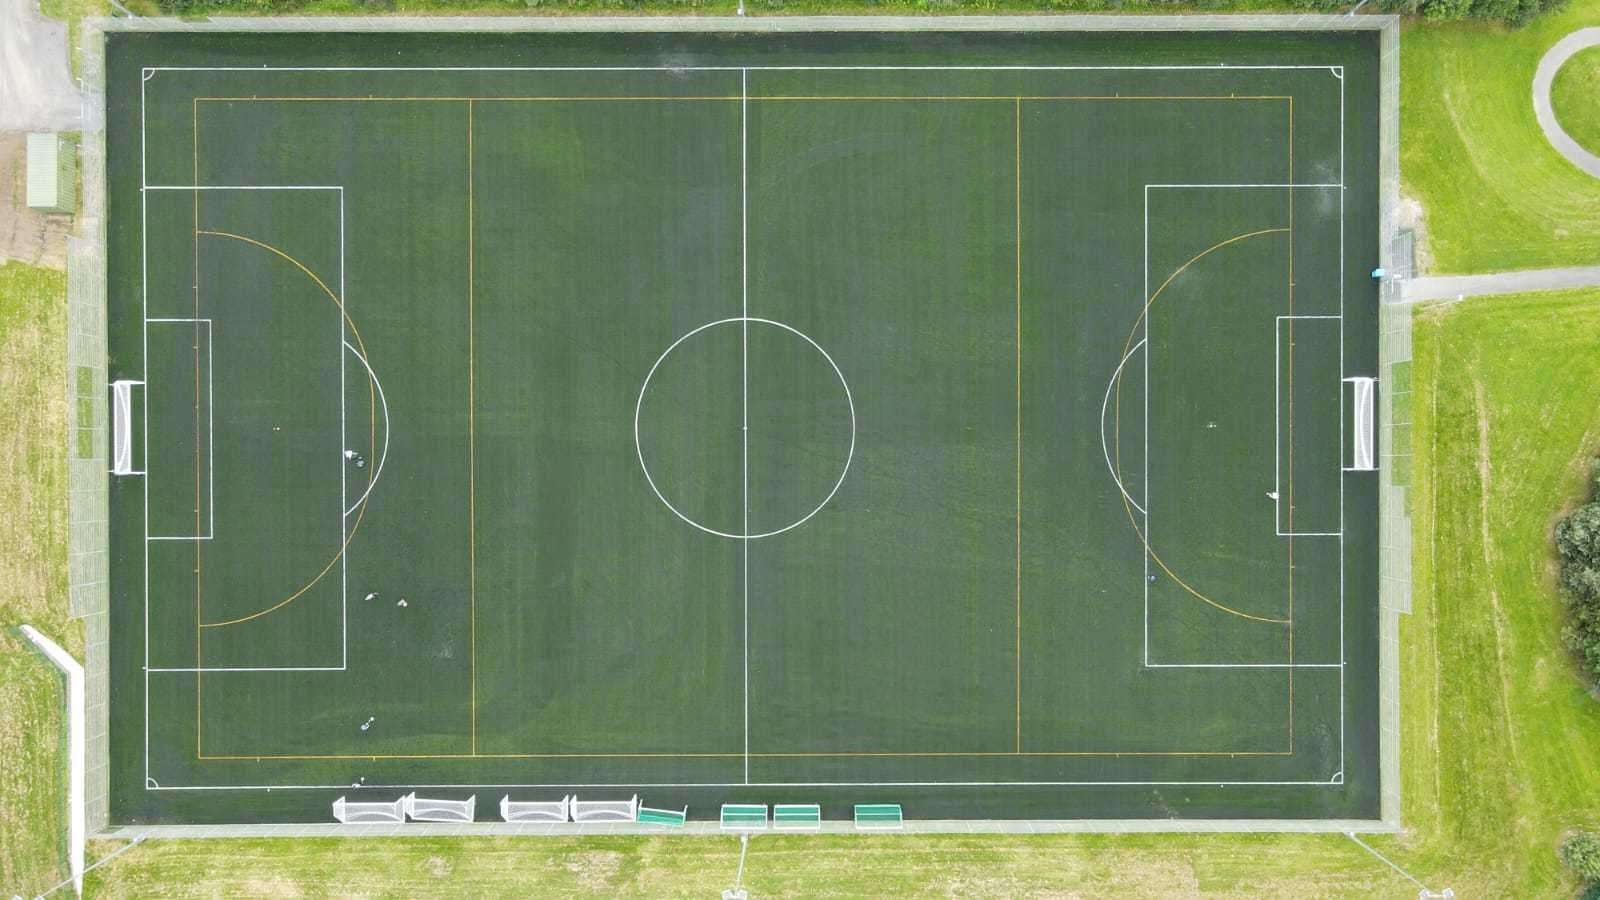 Aerial drone shot of the newly laid pitch at Dingwall Academy.